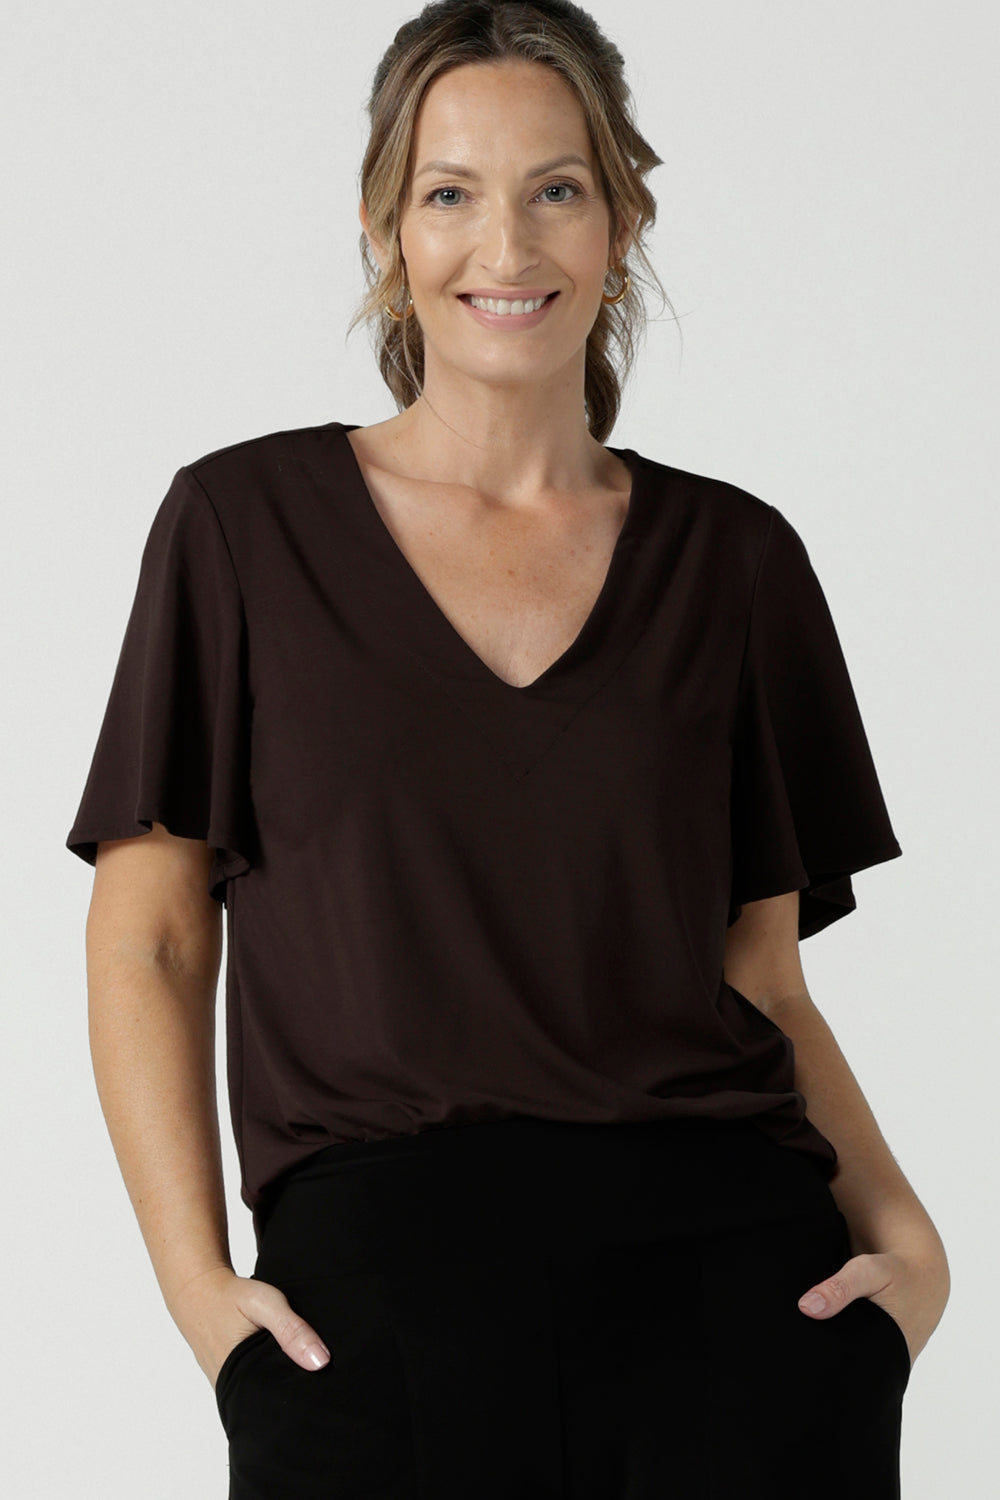 Women's breathable bamboo top for petite to plus size curvy women size 8-24. Ladies top for comfortable corporate wear. Featuring a flutter sleeve, V-neckline and curved hemline. 